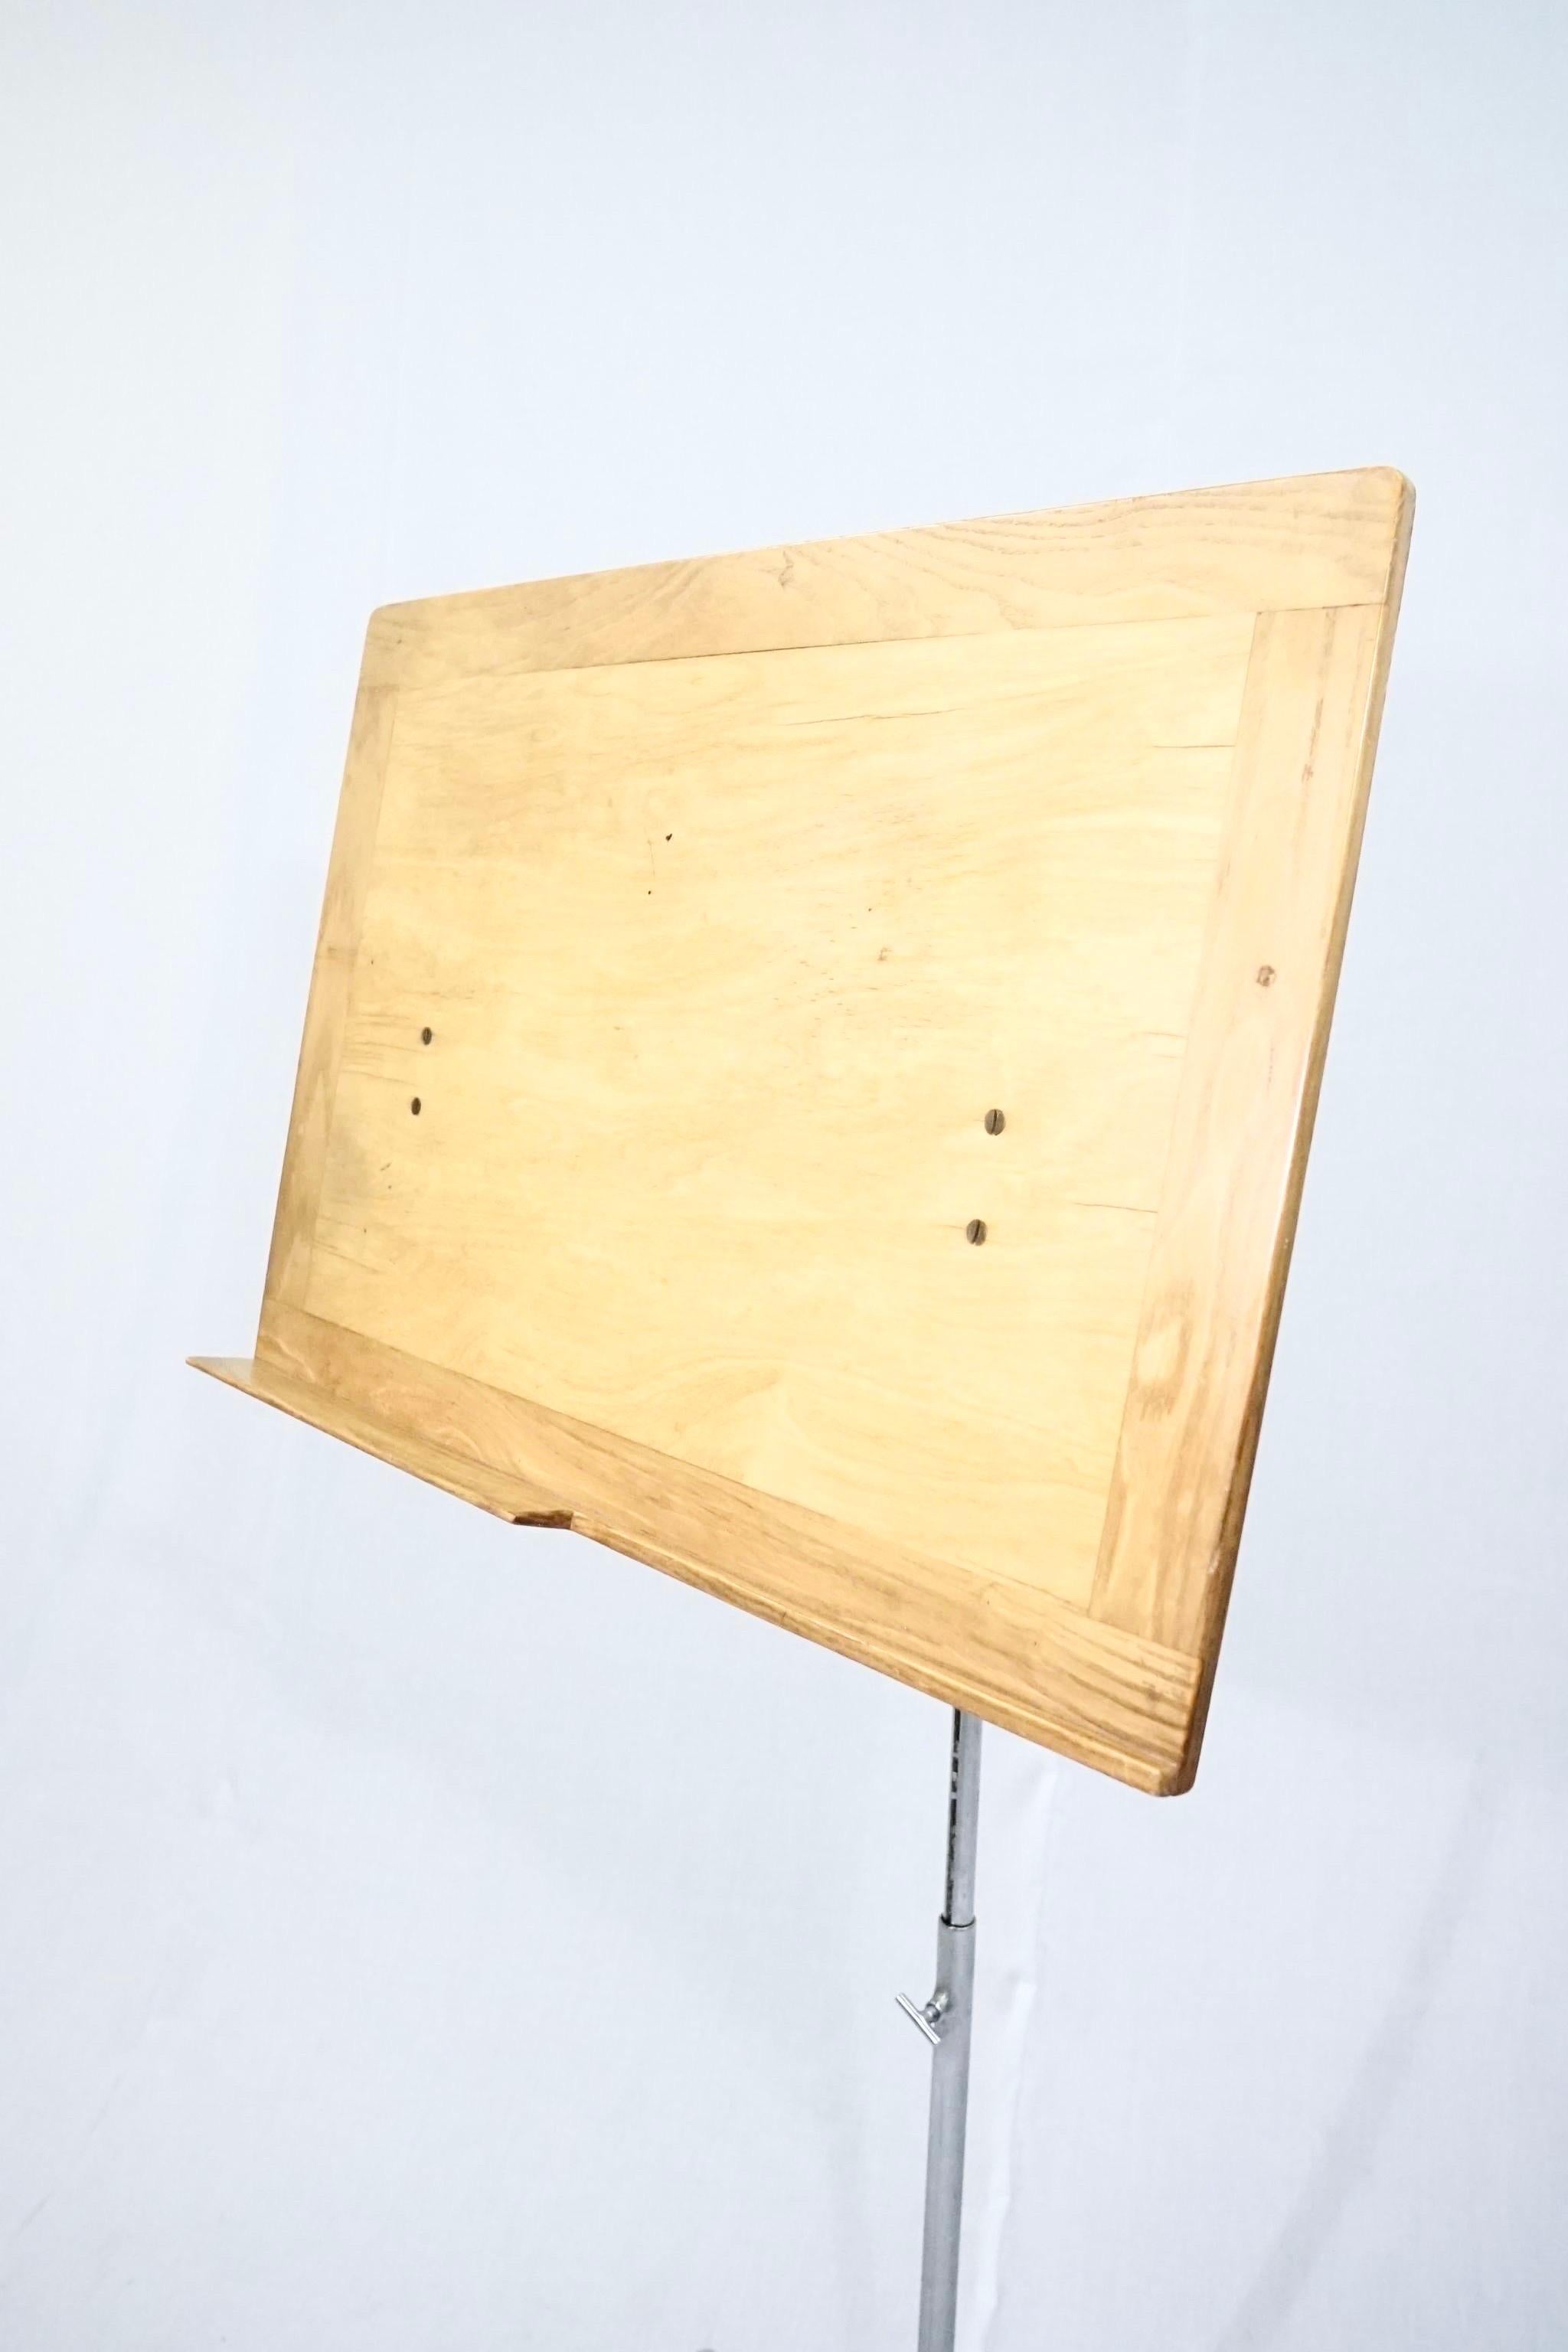 Rare Bruno Mathsson music stand produced by Firma Karl Mathsson in 1965.

The music stand is designed in 1941 and manufactured in his dad’s workshop.
This specific piece is dated to 1965 and is stamped with both Bruno Mathsson and Firma Karl